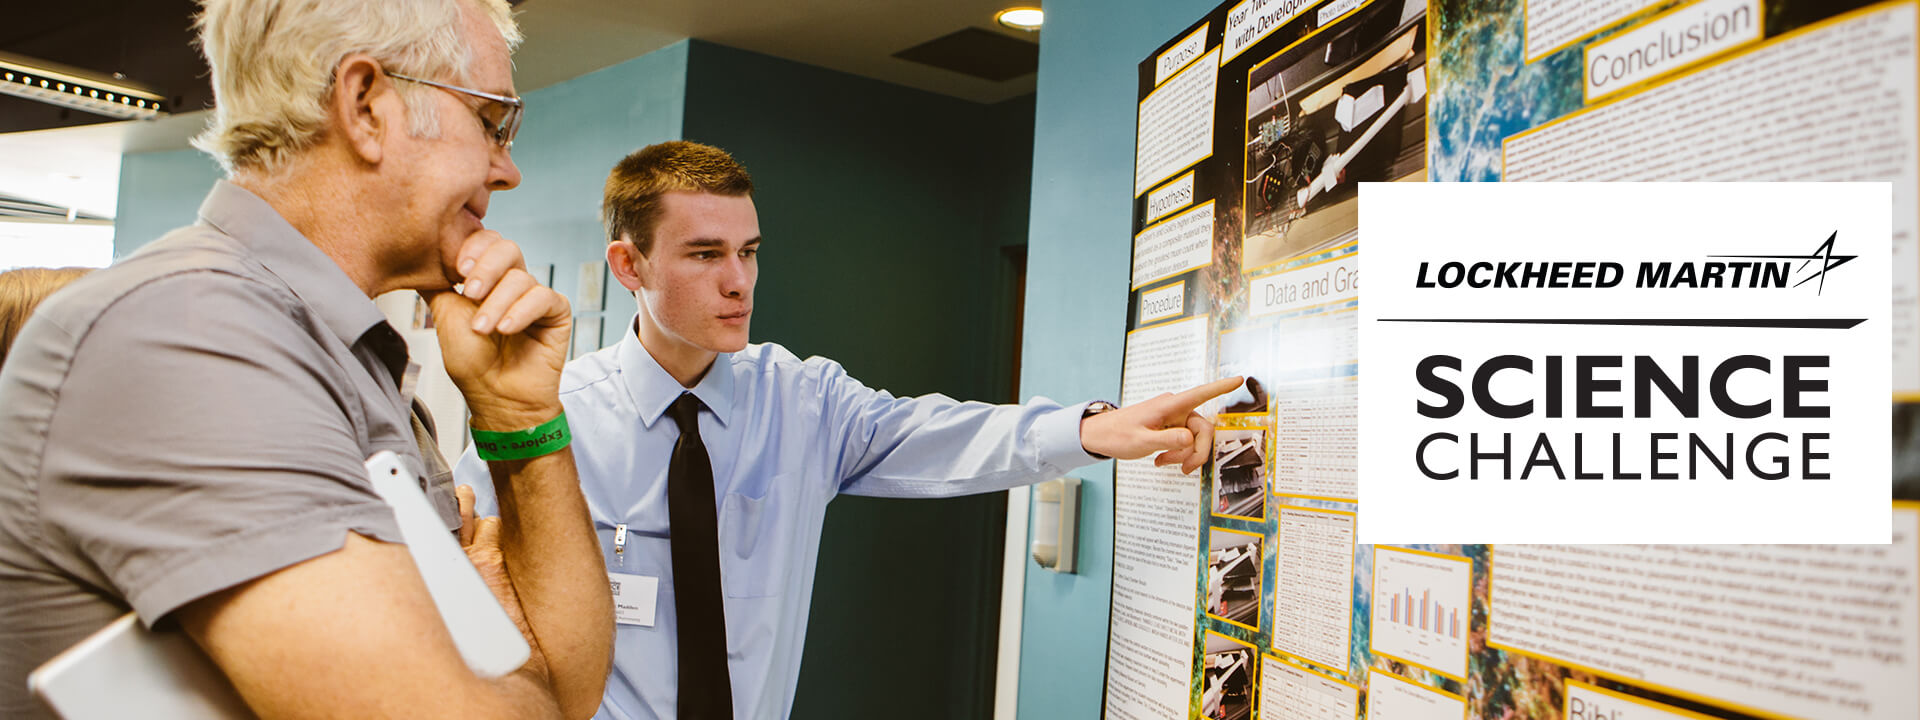 A high schooler explaining his research to a man at the Lockheed Martin Science Challenge.